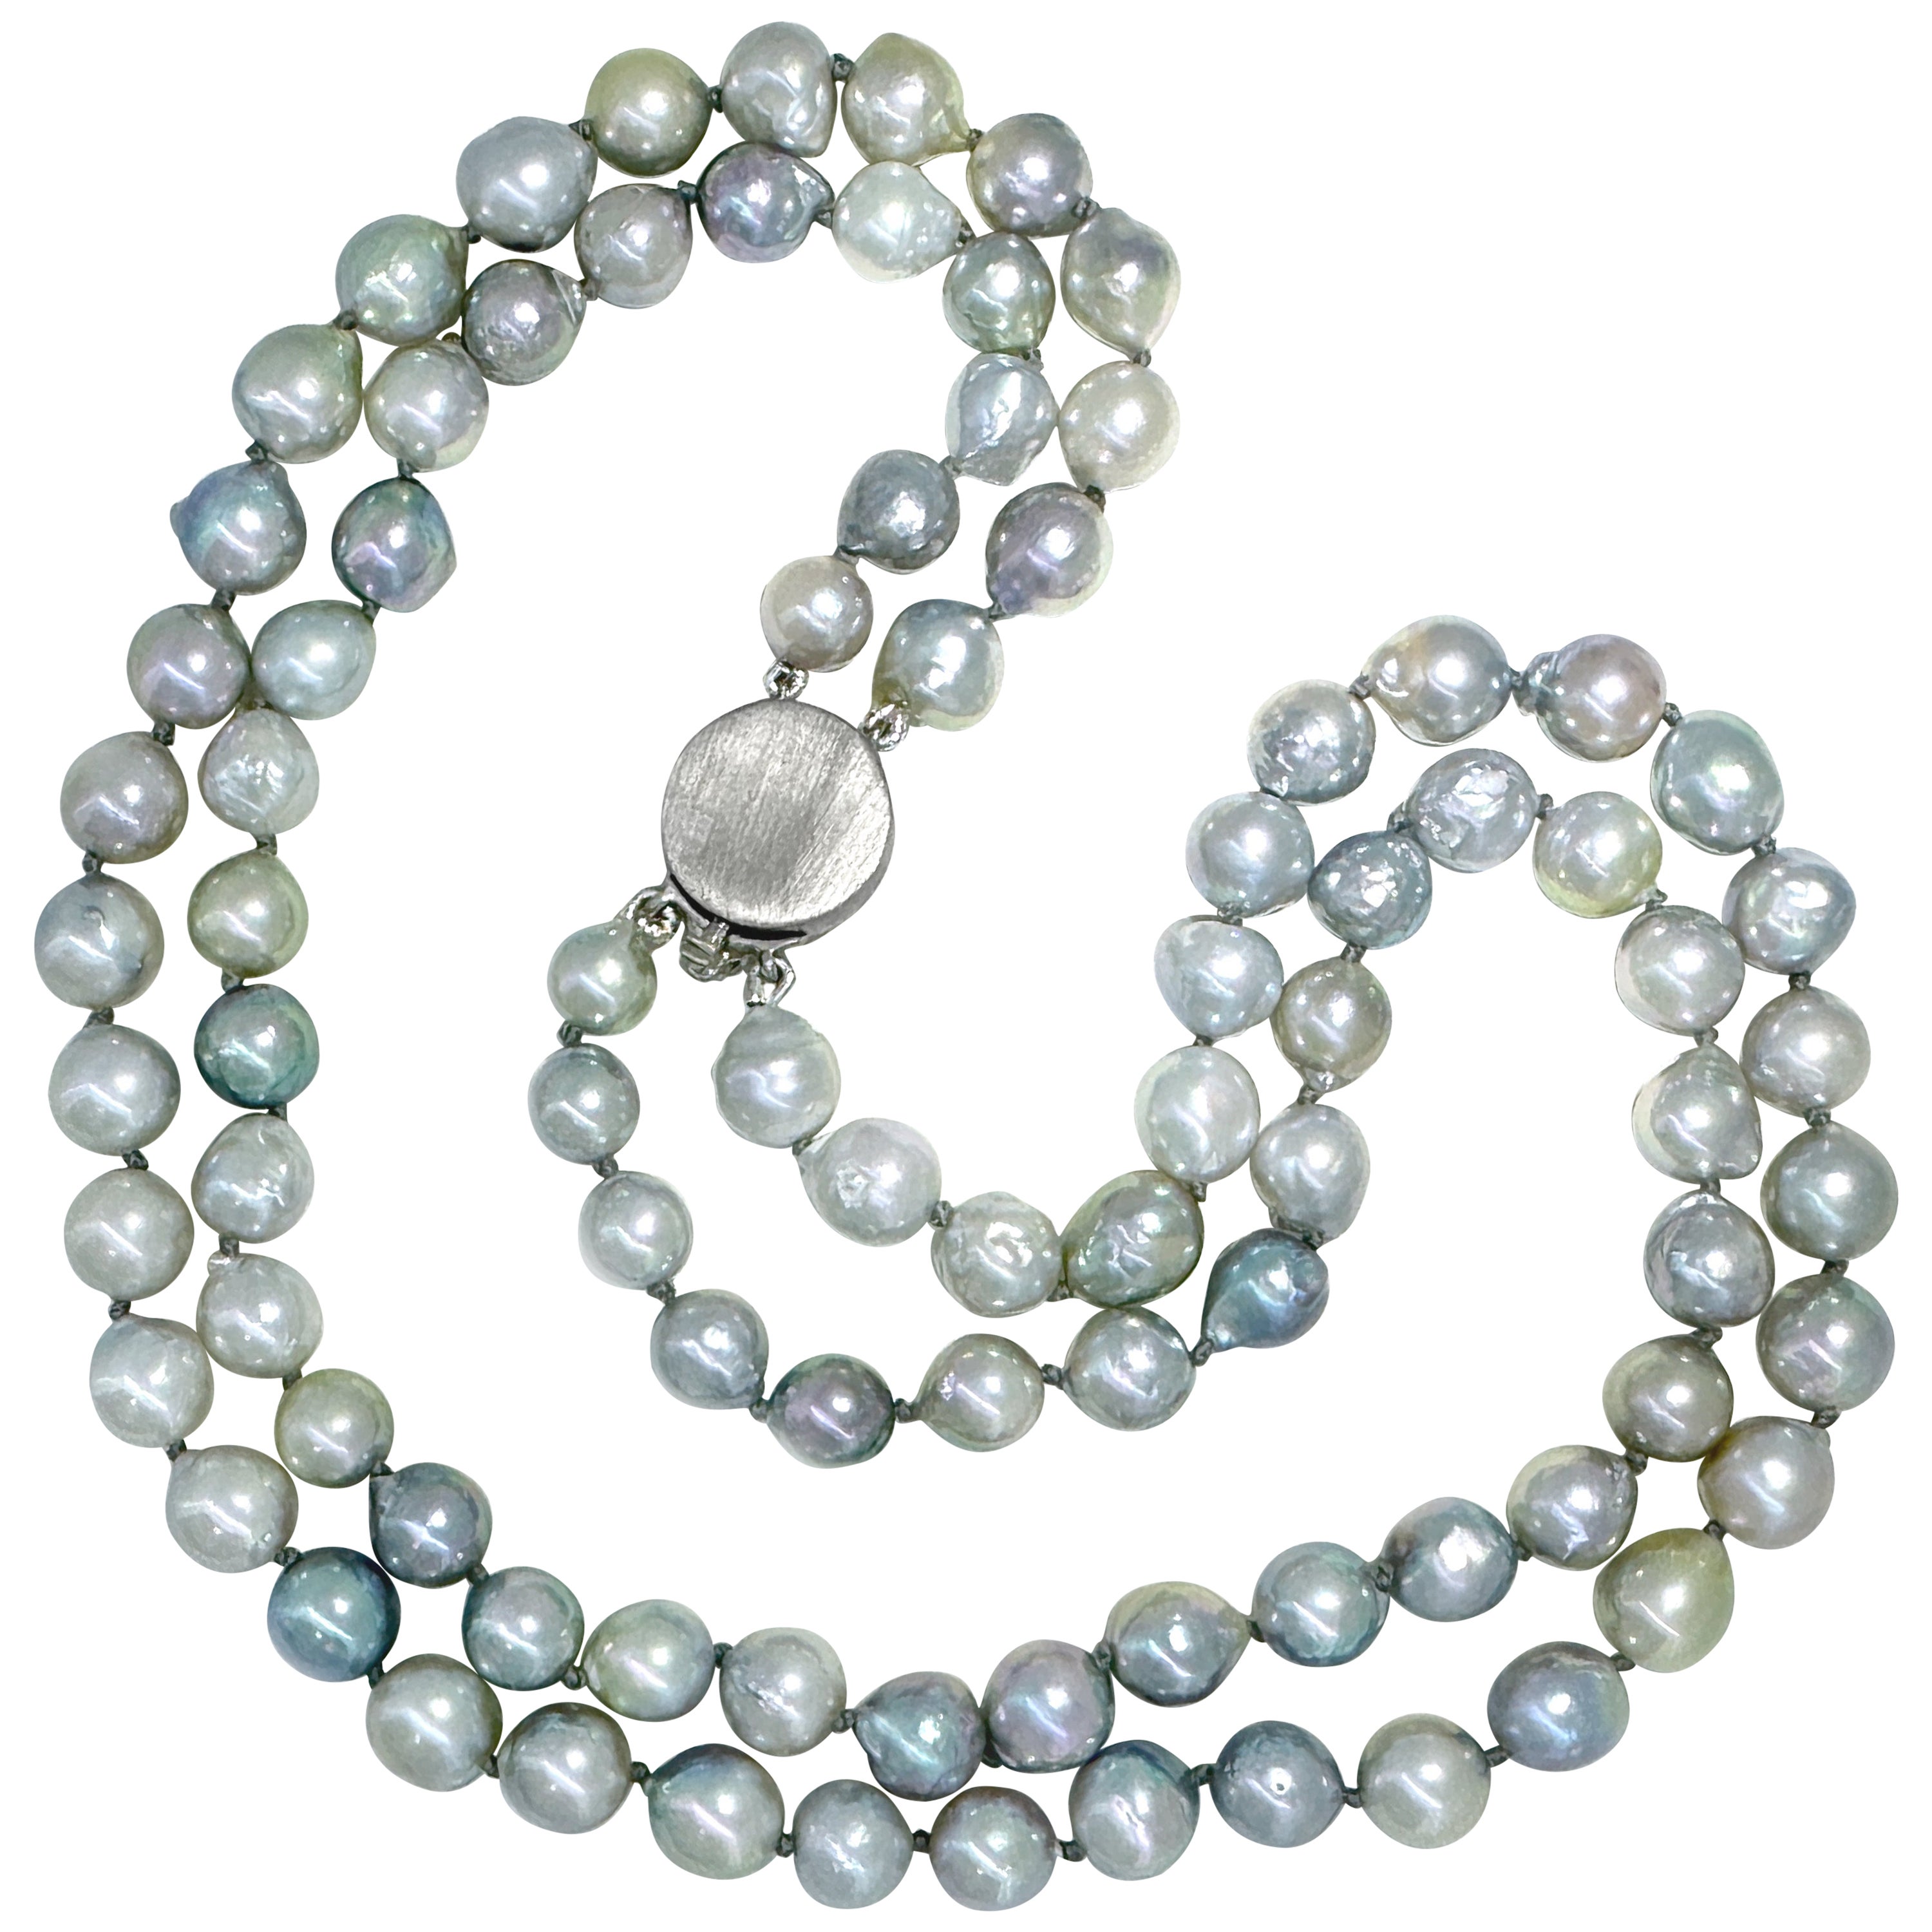 Frosty Baroque Akoya Pearls in 17" Two-Strand Necklace with Vintage Gold Clasp For Sale